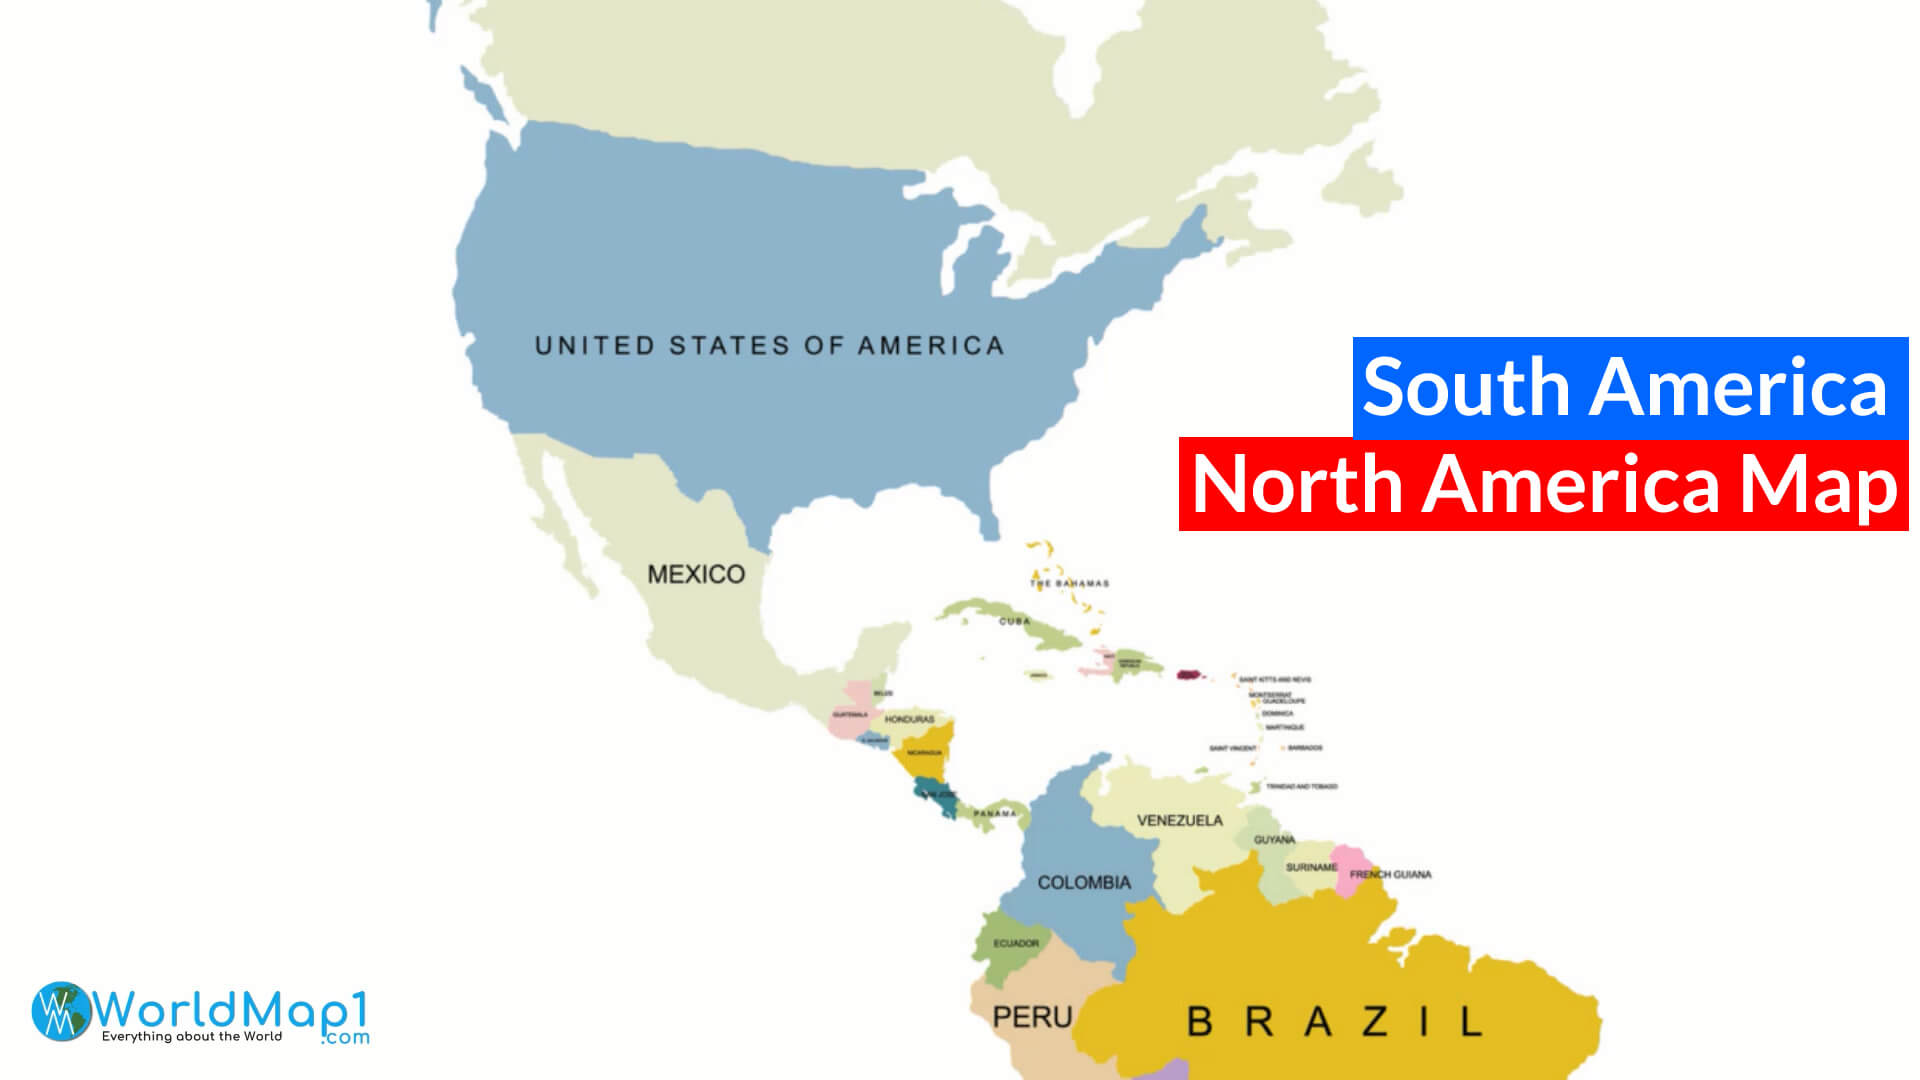 South America and North America Map